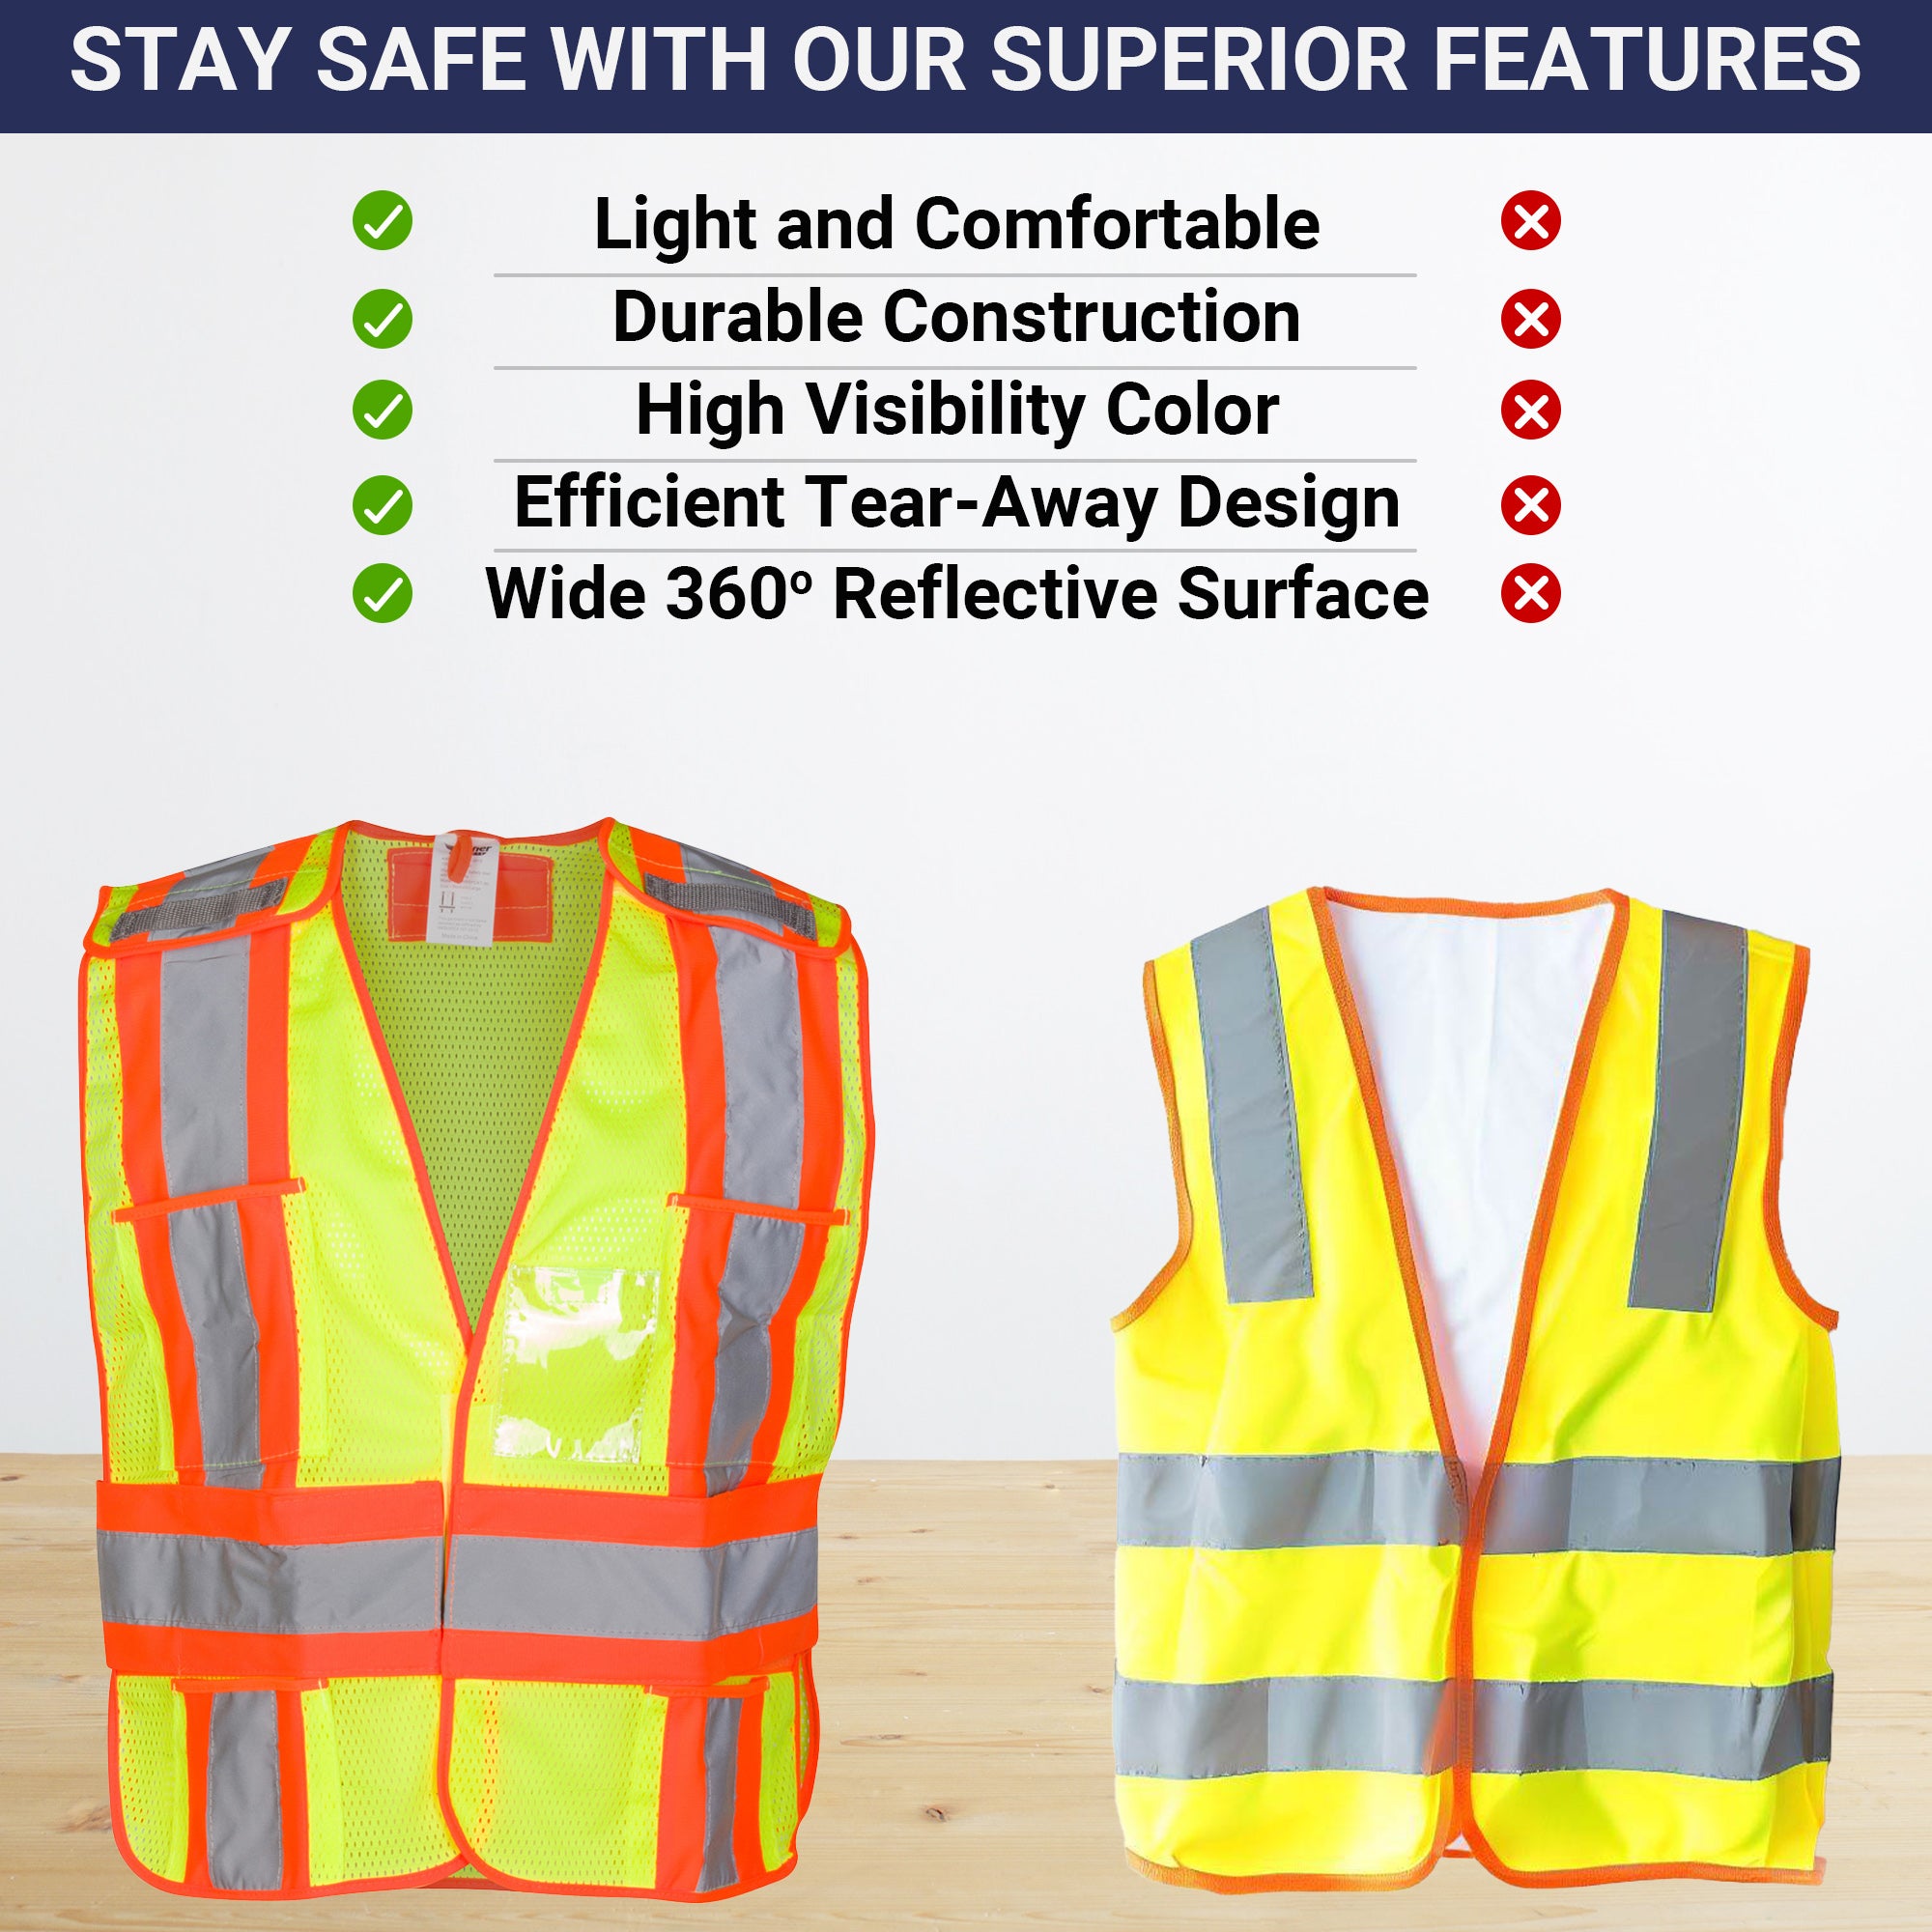 High Visibility Safety Vest – ANSI Class 2 Breakaway Vest with 5 Pocke